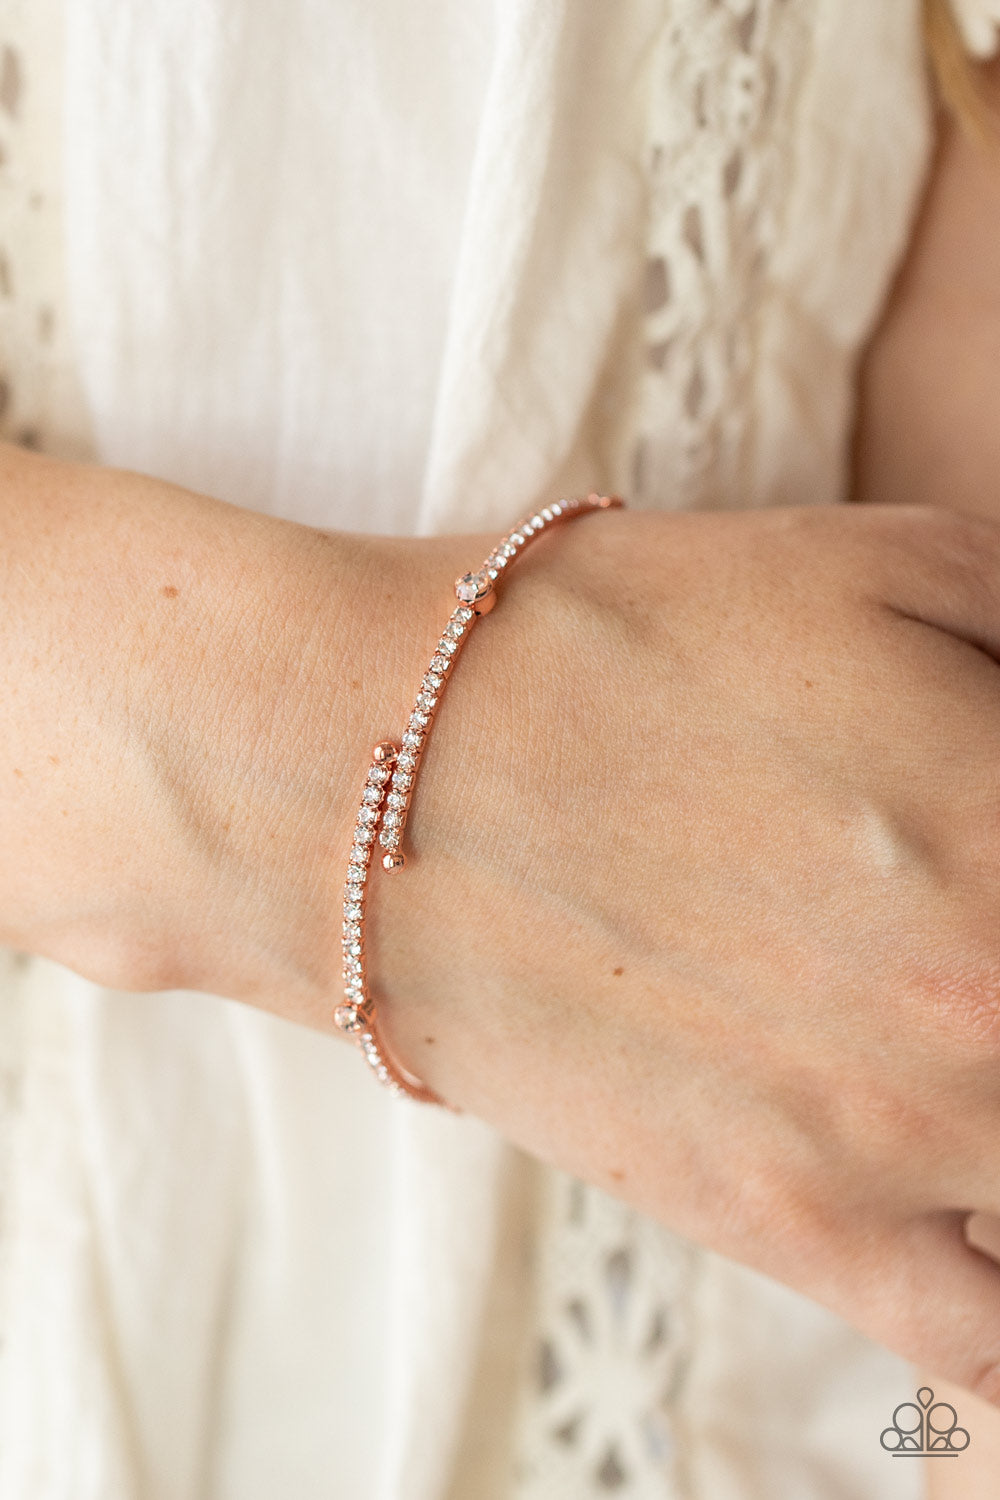 Encased in shiny copper fittings, a sparkly collection of solitaire white rhinestones adorn a glittery strand of dainty white rhinestones that coil around the wrist, creating a dainty cuff.  Sold as one bracelet.